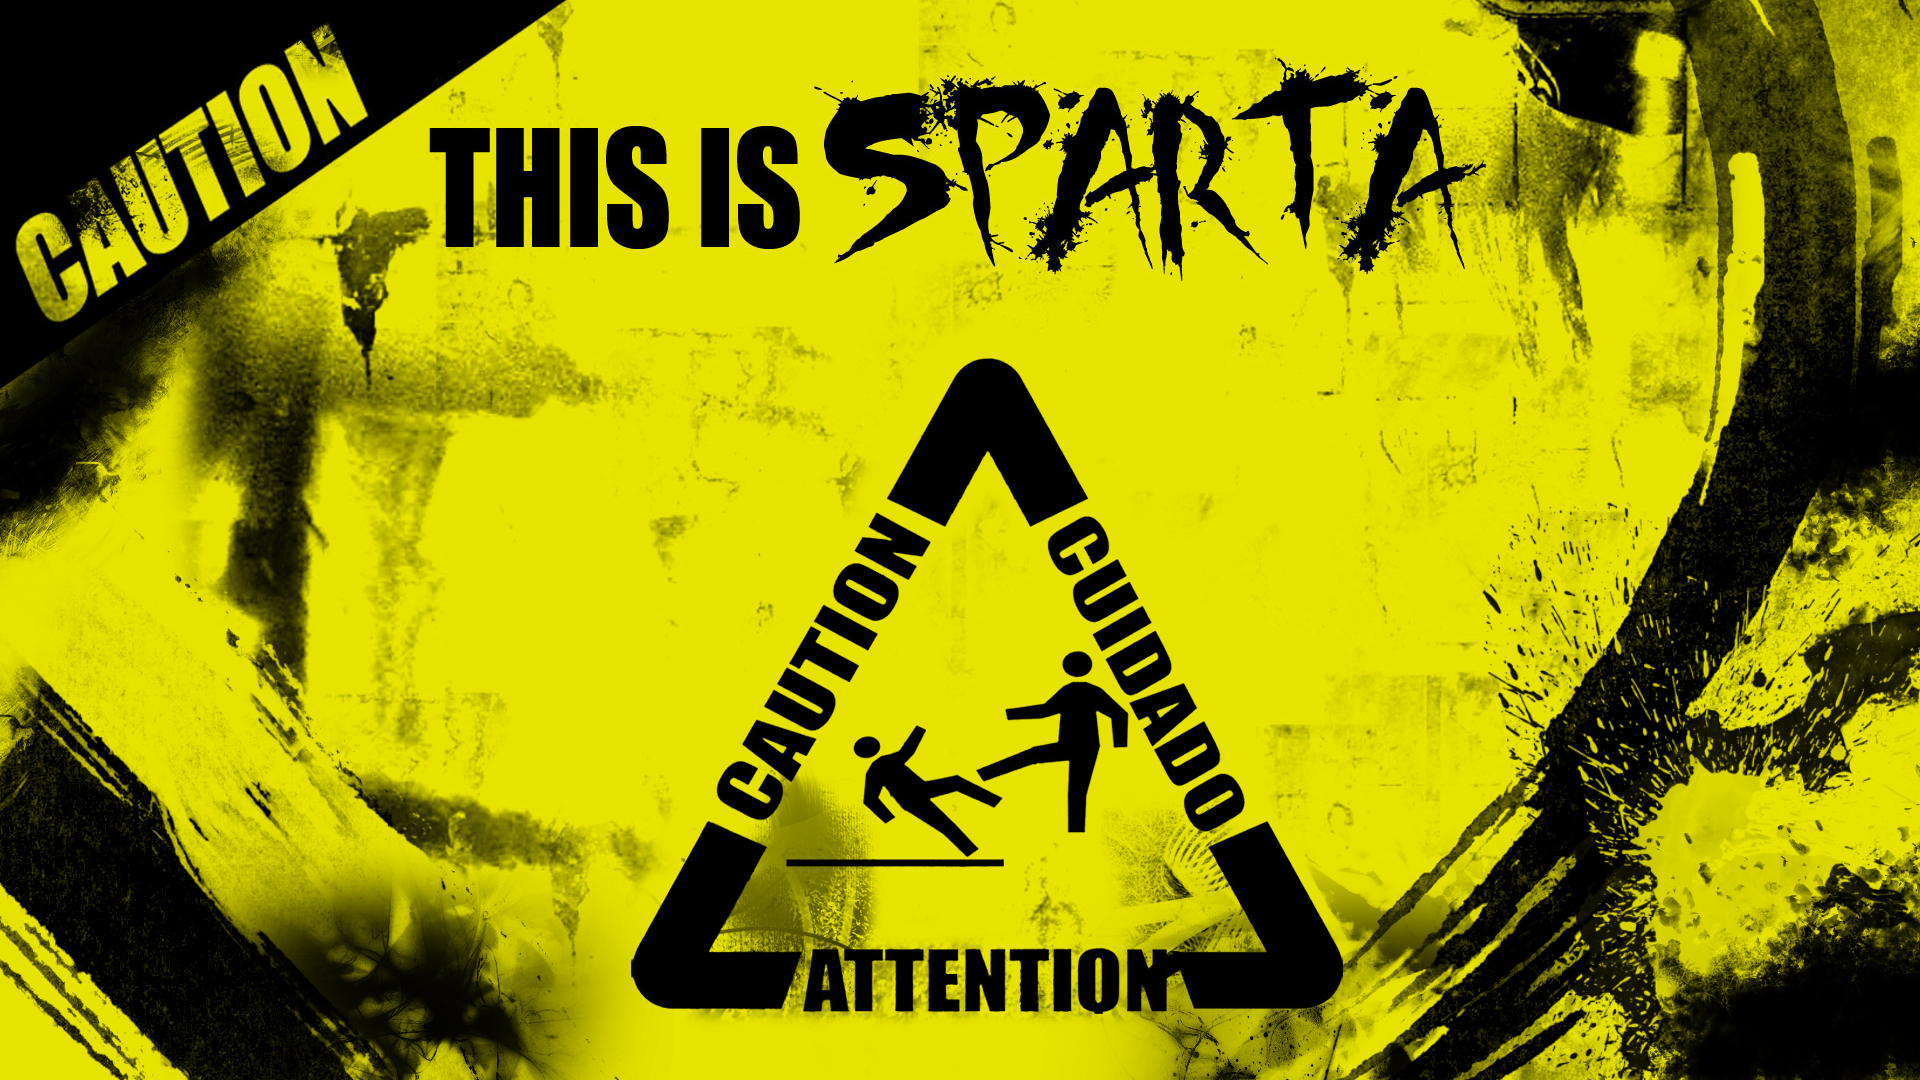 300 Warning Signs Digital Art Yellow Humor Triangle Sparta Yellow Background Grunge Typography 1920x1080